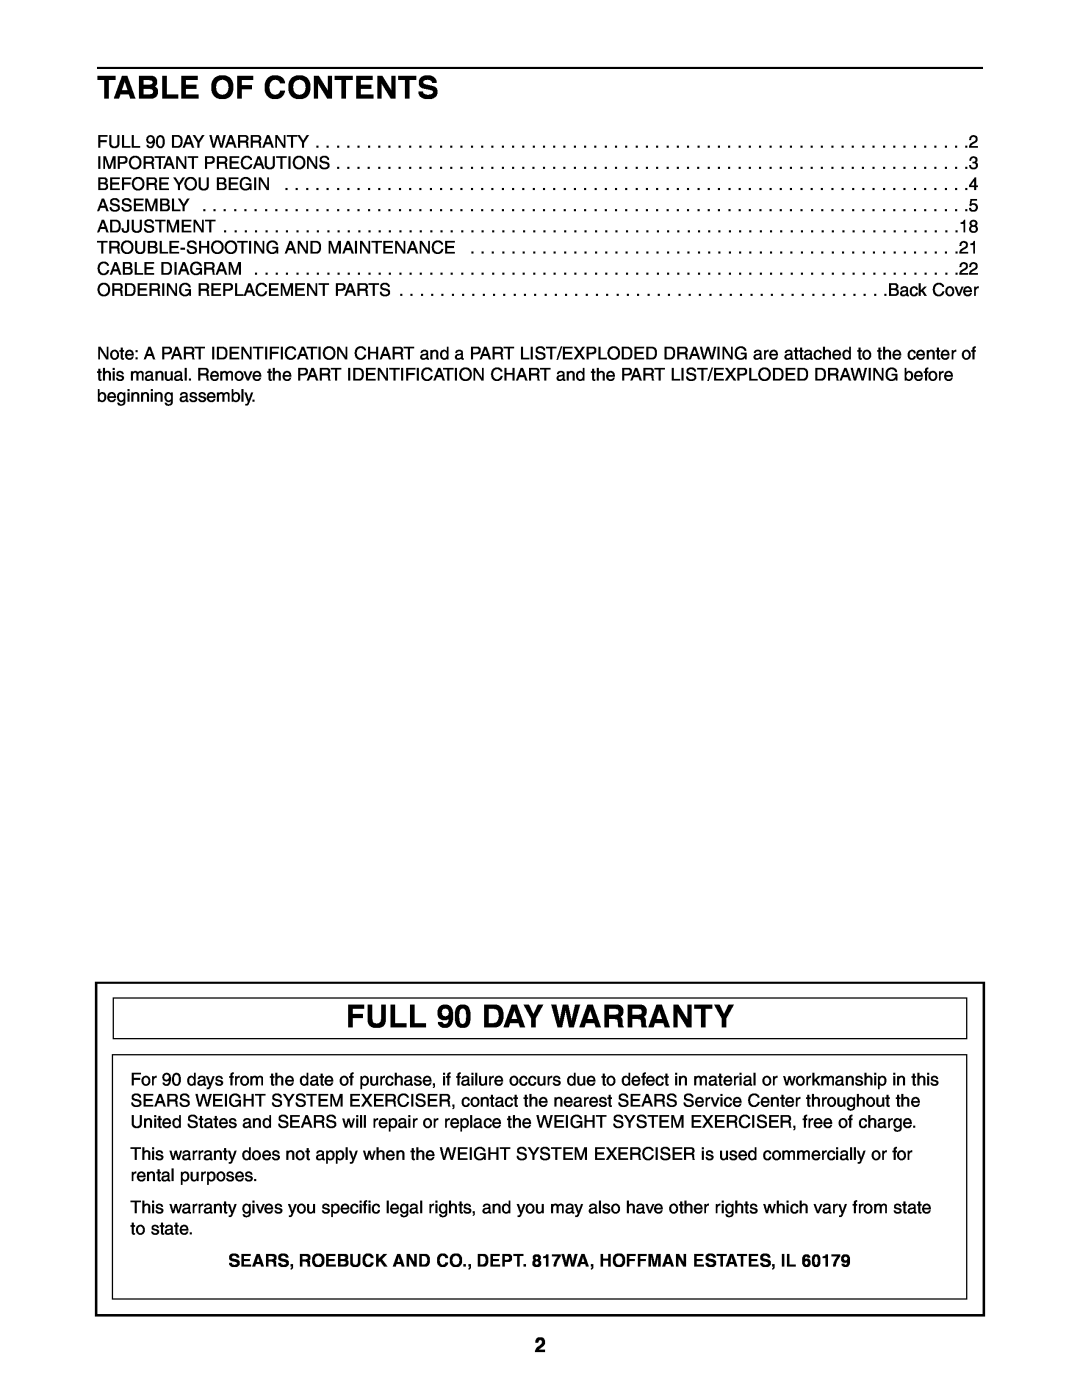 Sears 831.159460 Table Of Contents, FULL 90 DAY WARRANTY, SEARS, ROEBUCK AND CO., DEPT. 817WA, HOFFMAN ESTATES, IL 